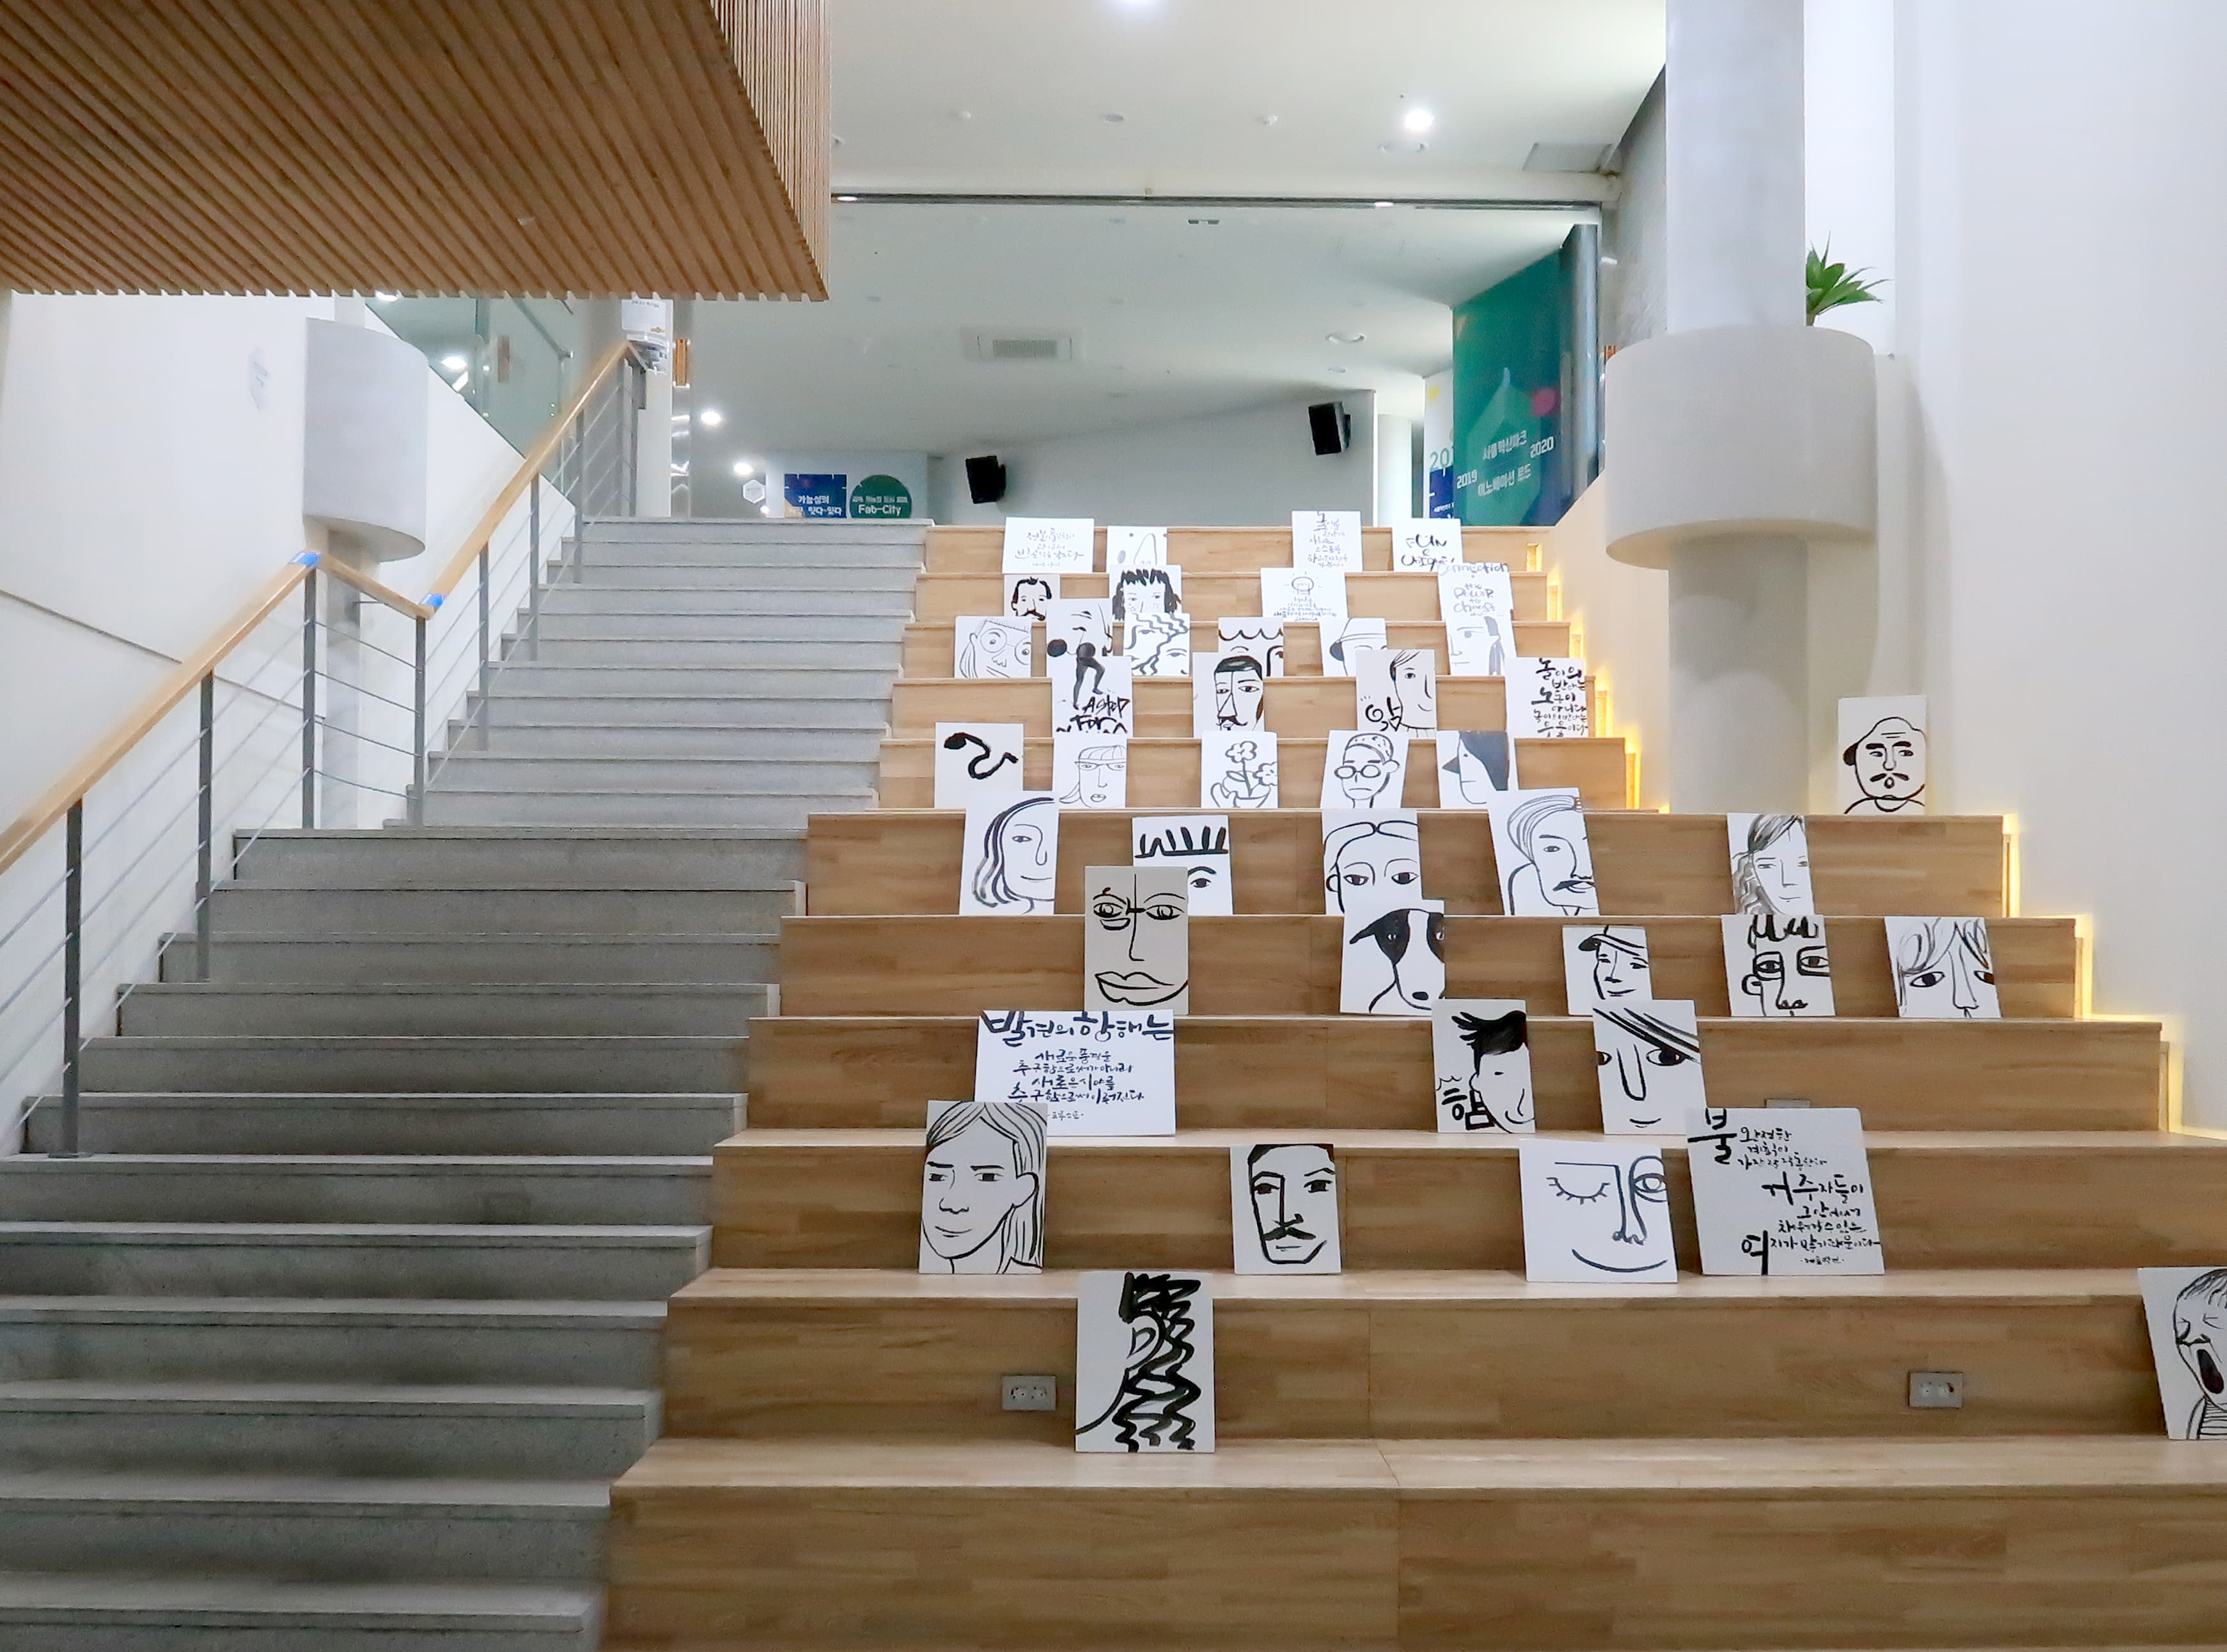 Seoul Innovation Park 1 : Portraits exhibited on indoor stairs of the Park